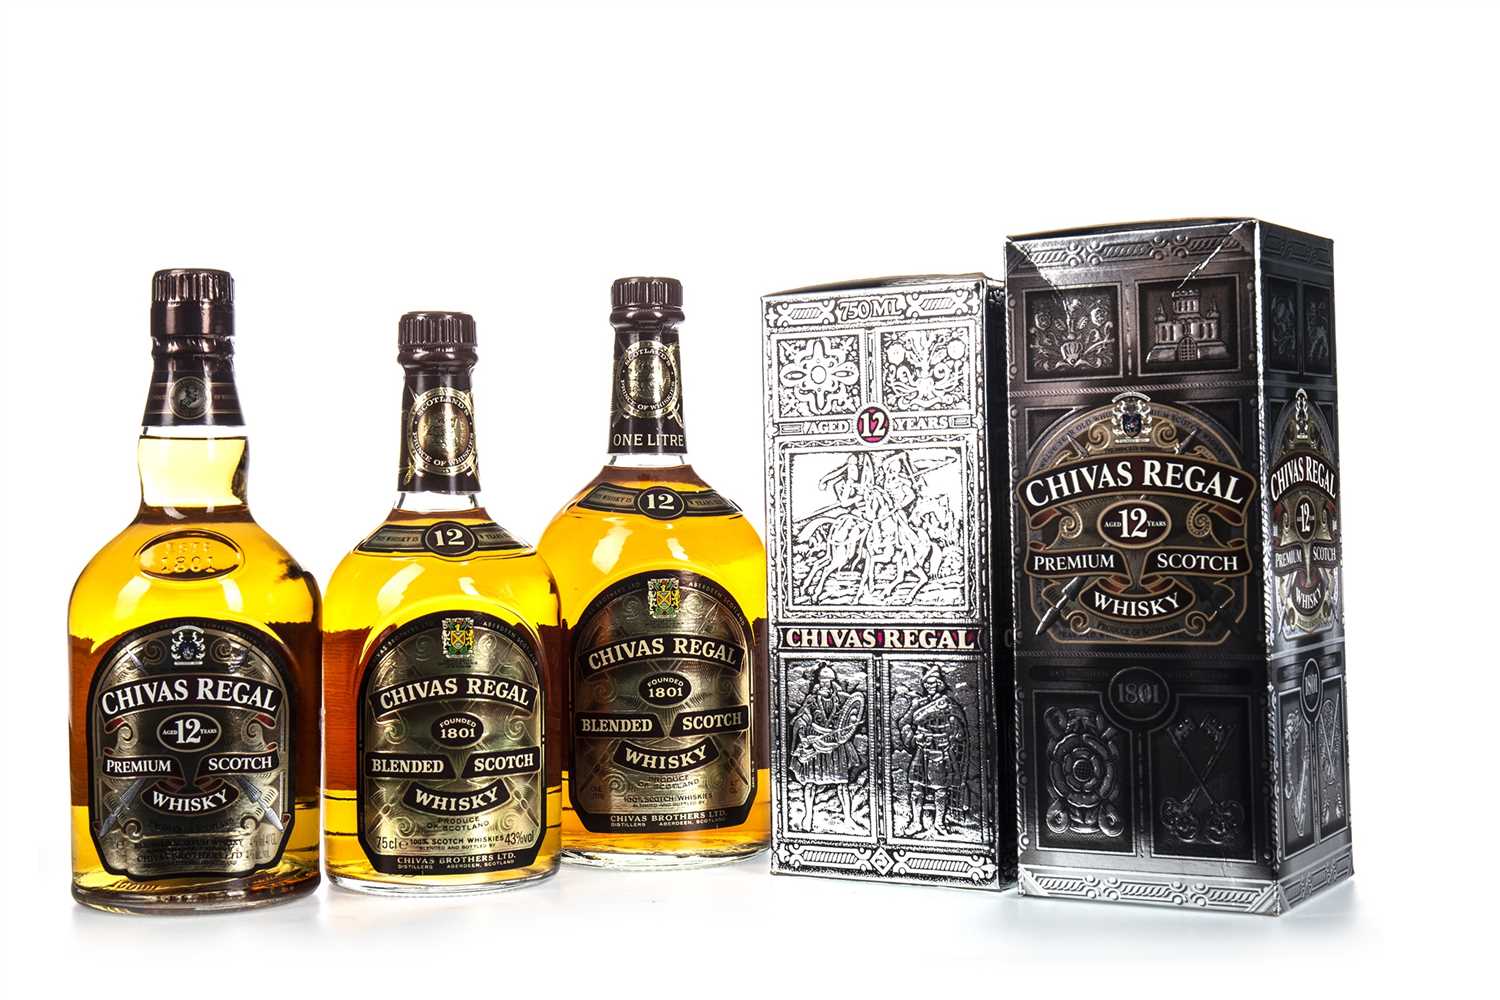 Lot 419 - TWO BOTTLES AND ONE LITRE OF CHIVAS REGAL 12 YEARS OLD